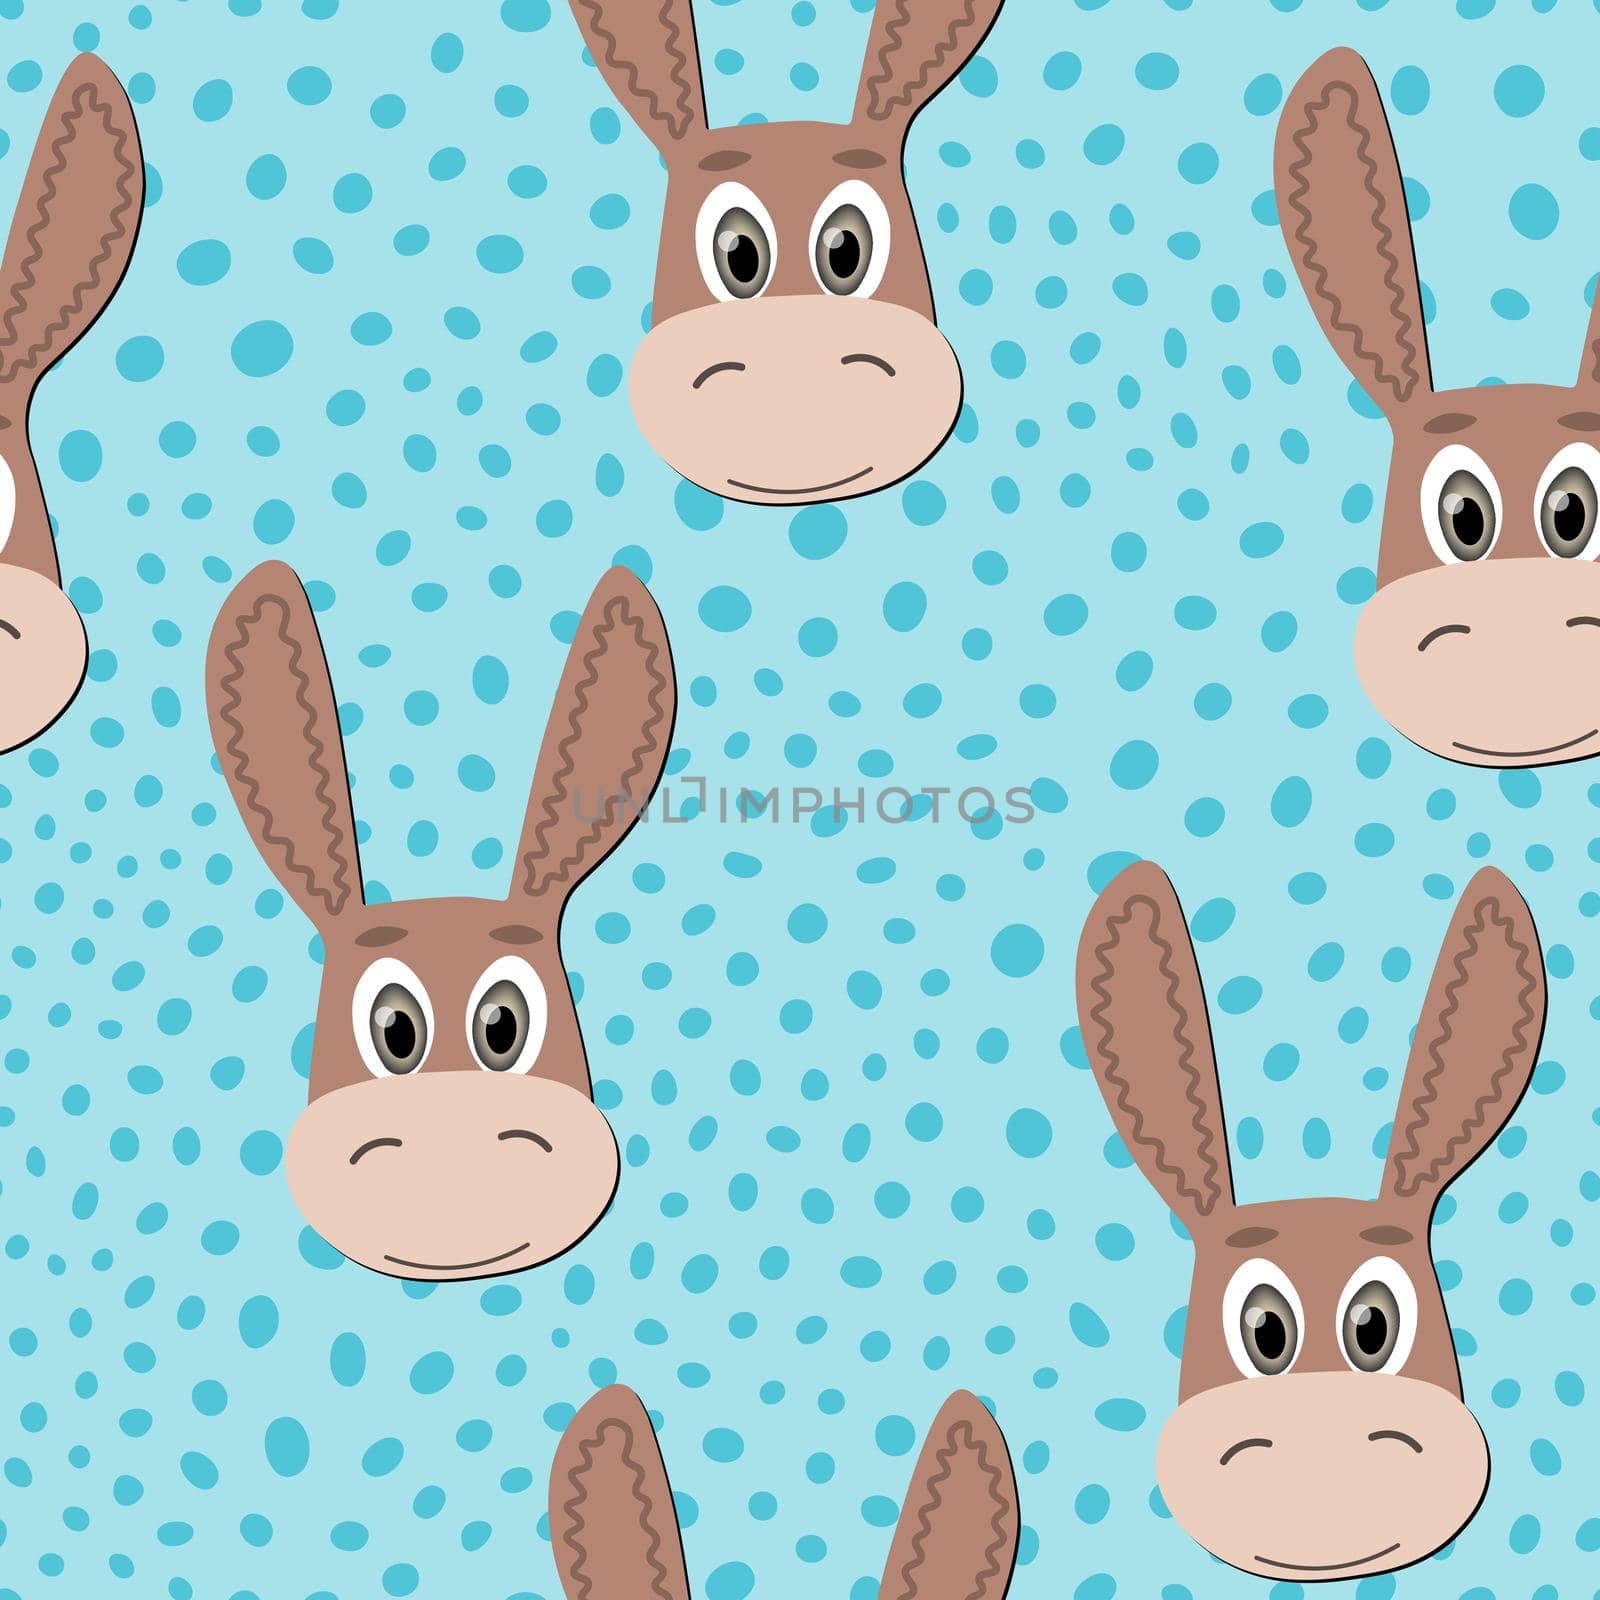 Vector flat animals colorful illustration for kids. Seamless pattern with cute donkey face on blue polka dots ackground. Cartoon adorable character. Design for textures, card, poster, fabric,textile. by allaku